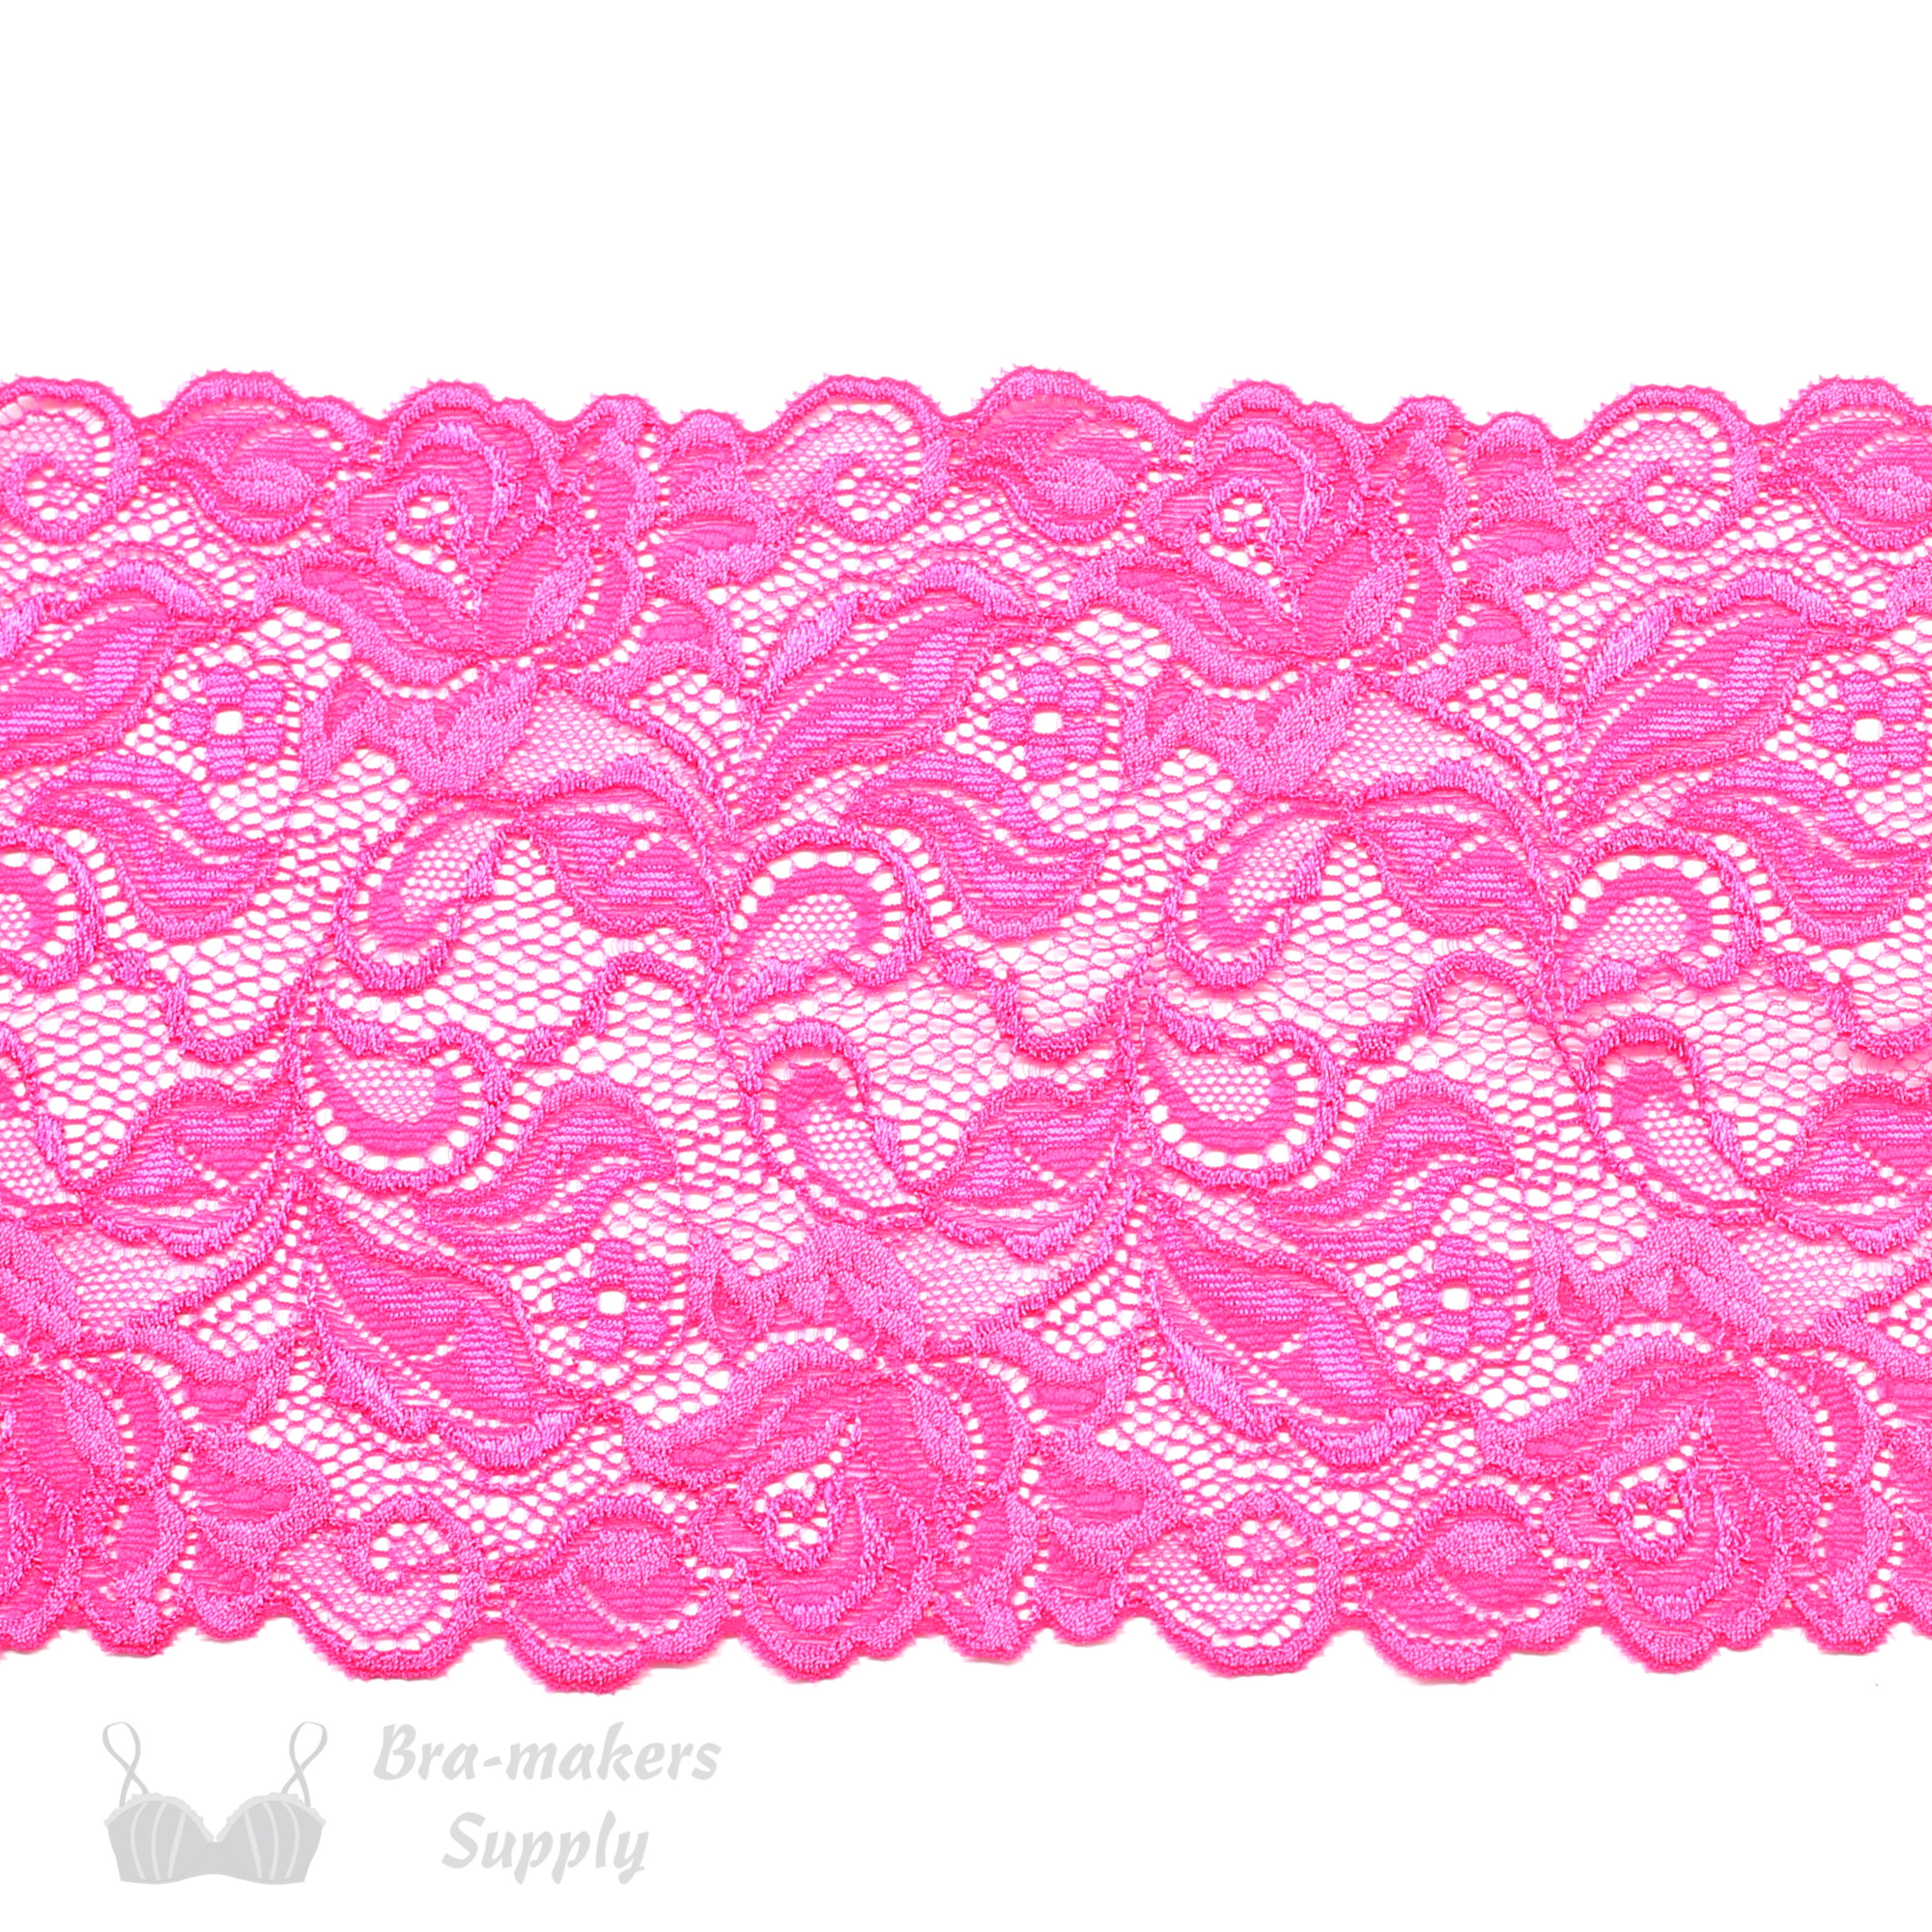 https://www.braandcorsetsupplies.com/wp-content/uploads/Six-Inch-Candy-Pink-Floral-Stretch-Lace-Bra-makers-Supply-.jpg